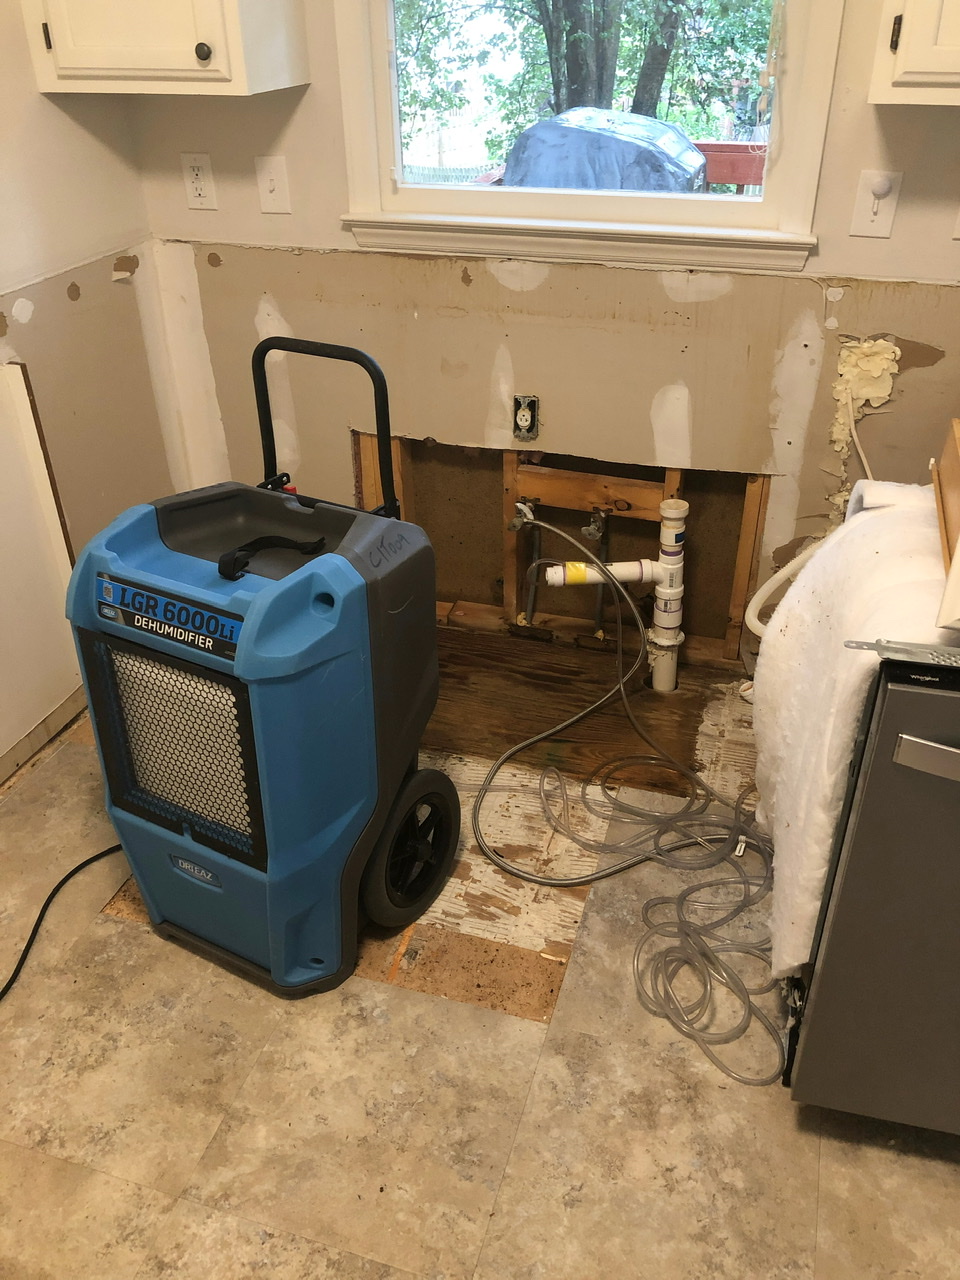 Kitchen Leak!—Our First Homeowners Insurance Claim